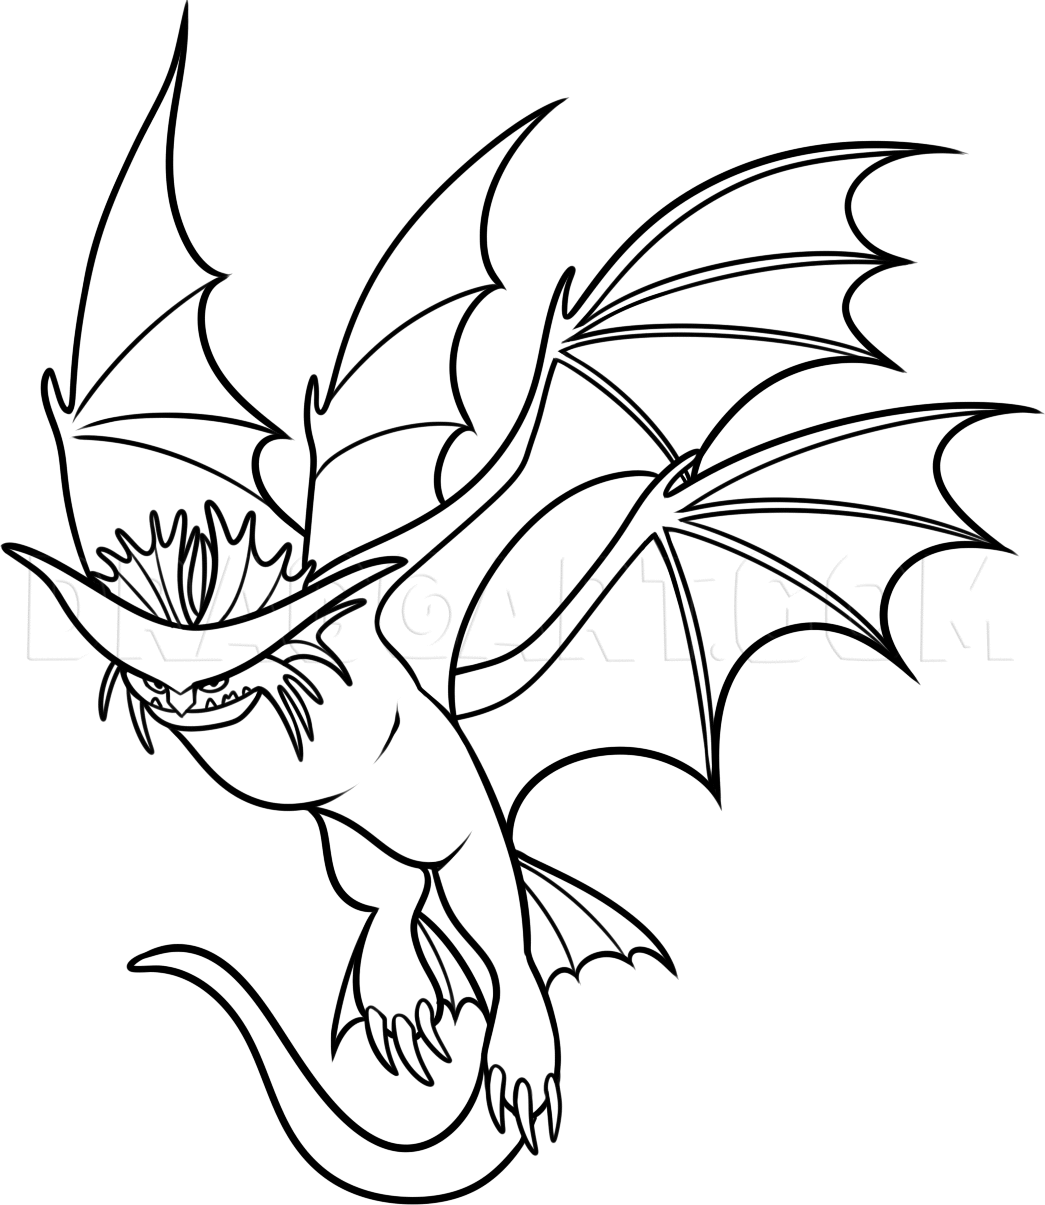 how to train your dragon coloring pages cloudjumper